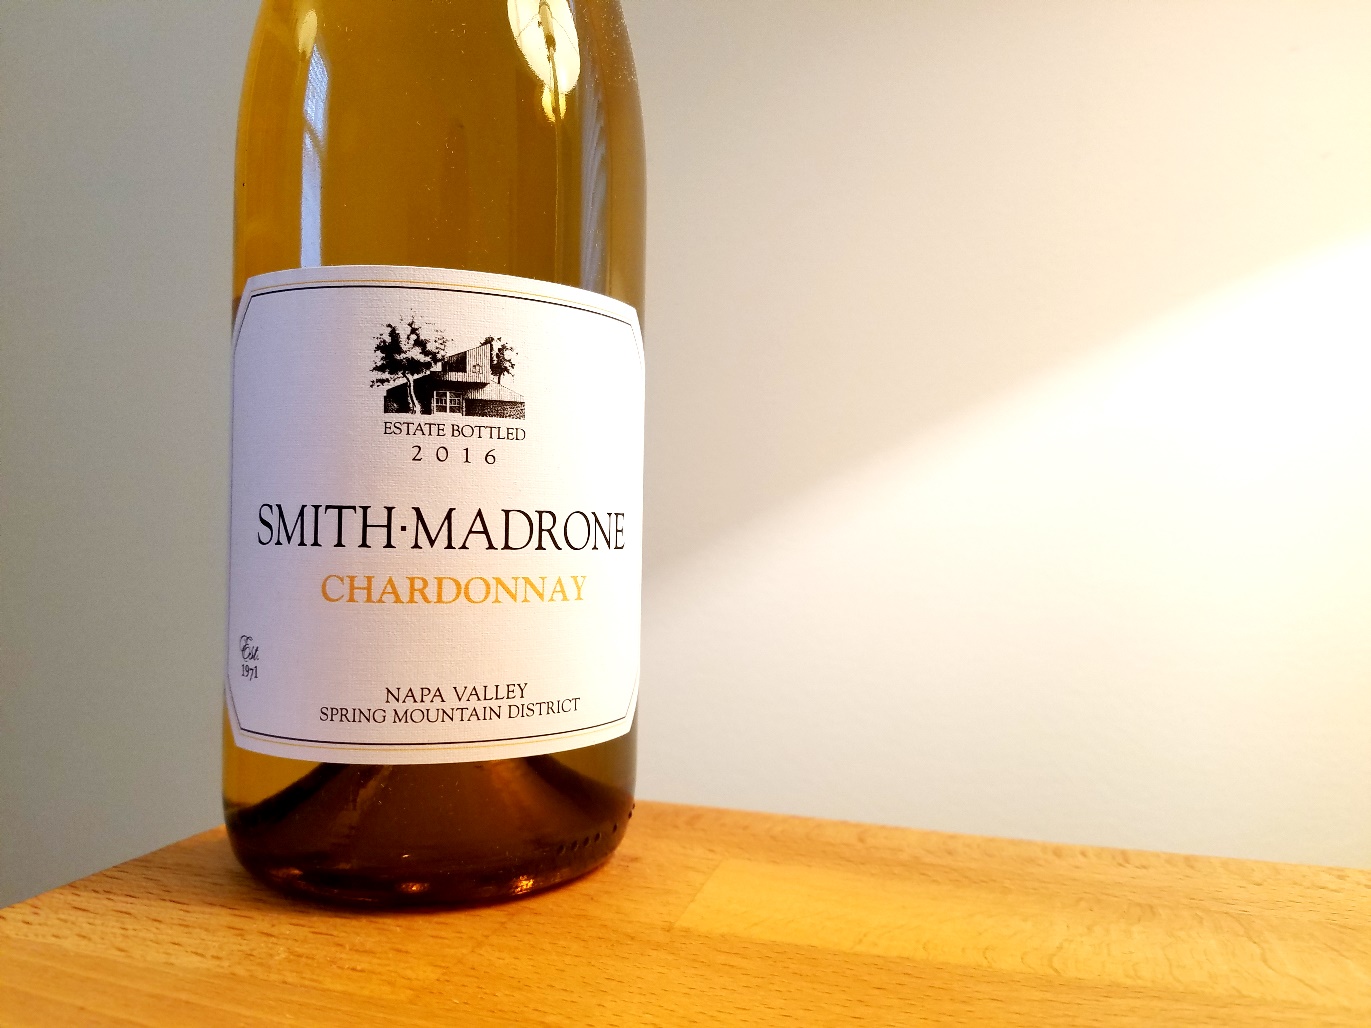 Smith-Madrone Vineyards and Winery, Chardonnay 2016, Spring Mountain District, Napa Valley, California, Wine Casual